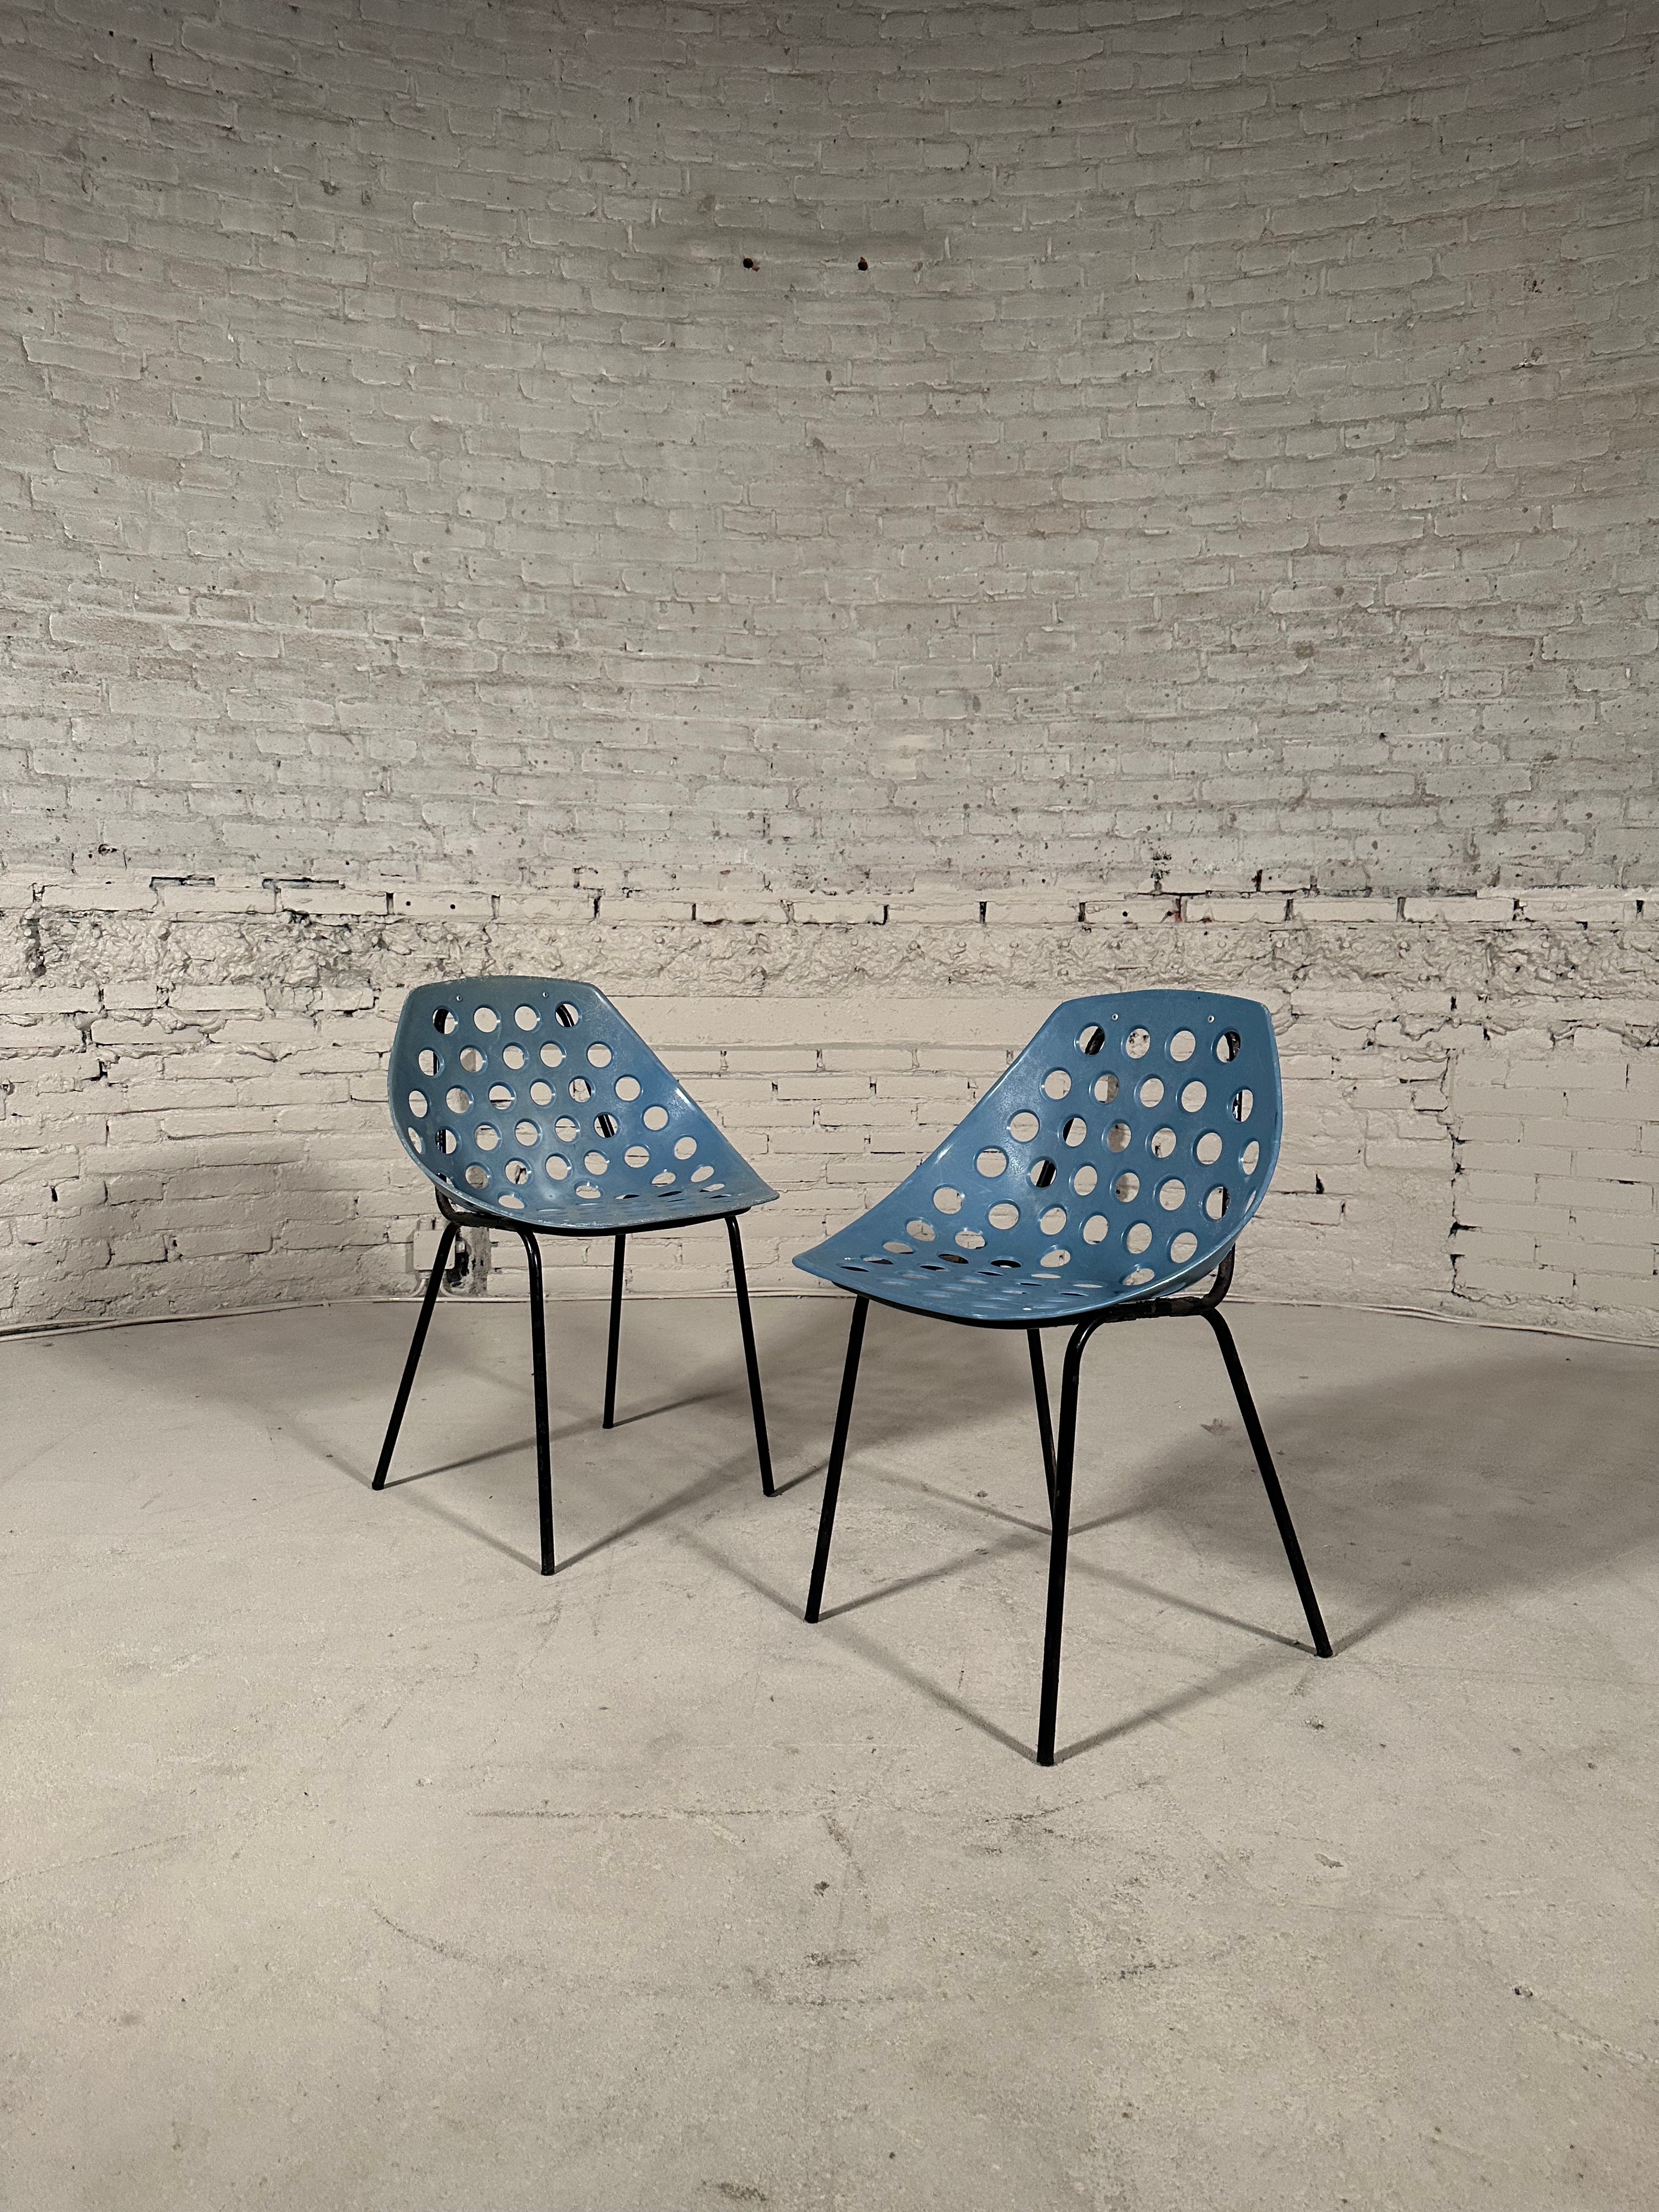 Pair of Coquillage chairs by Pierre Guariche